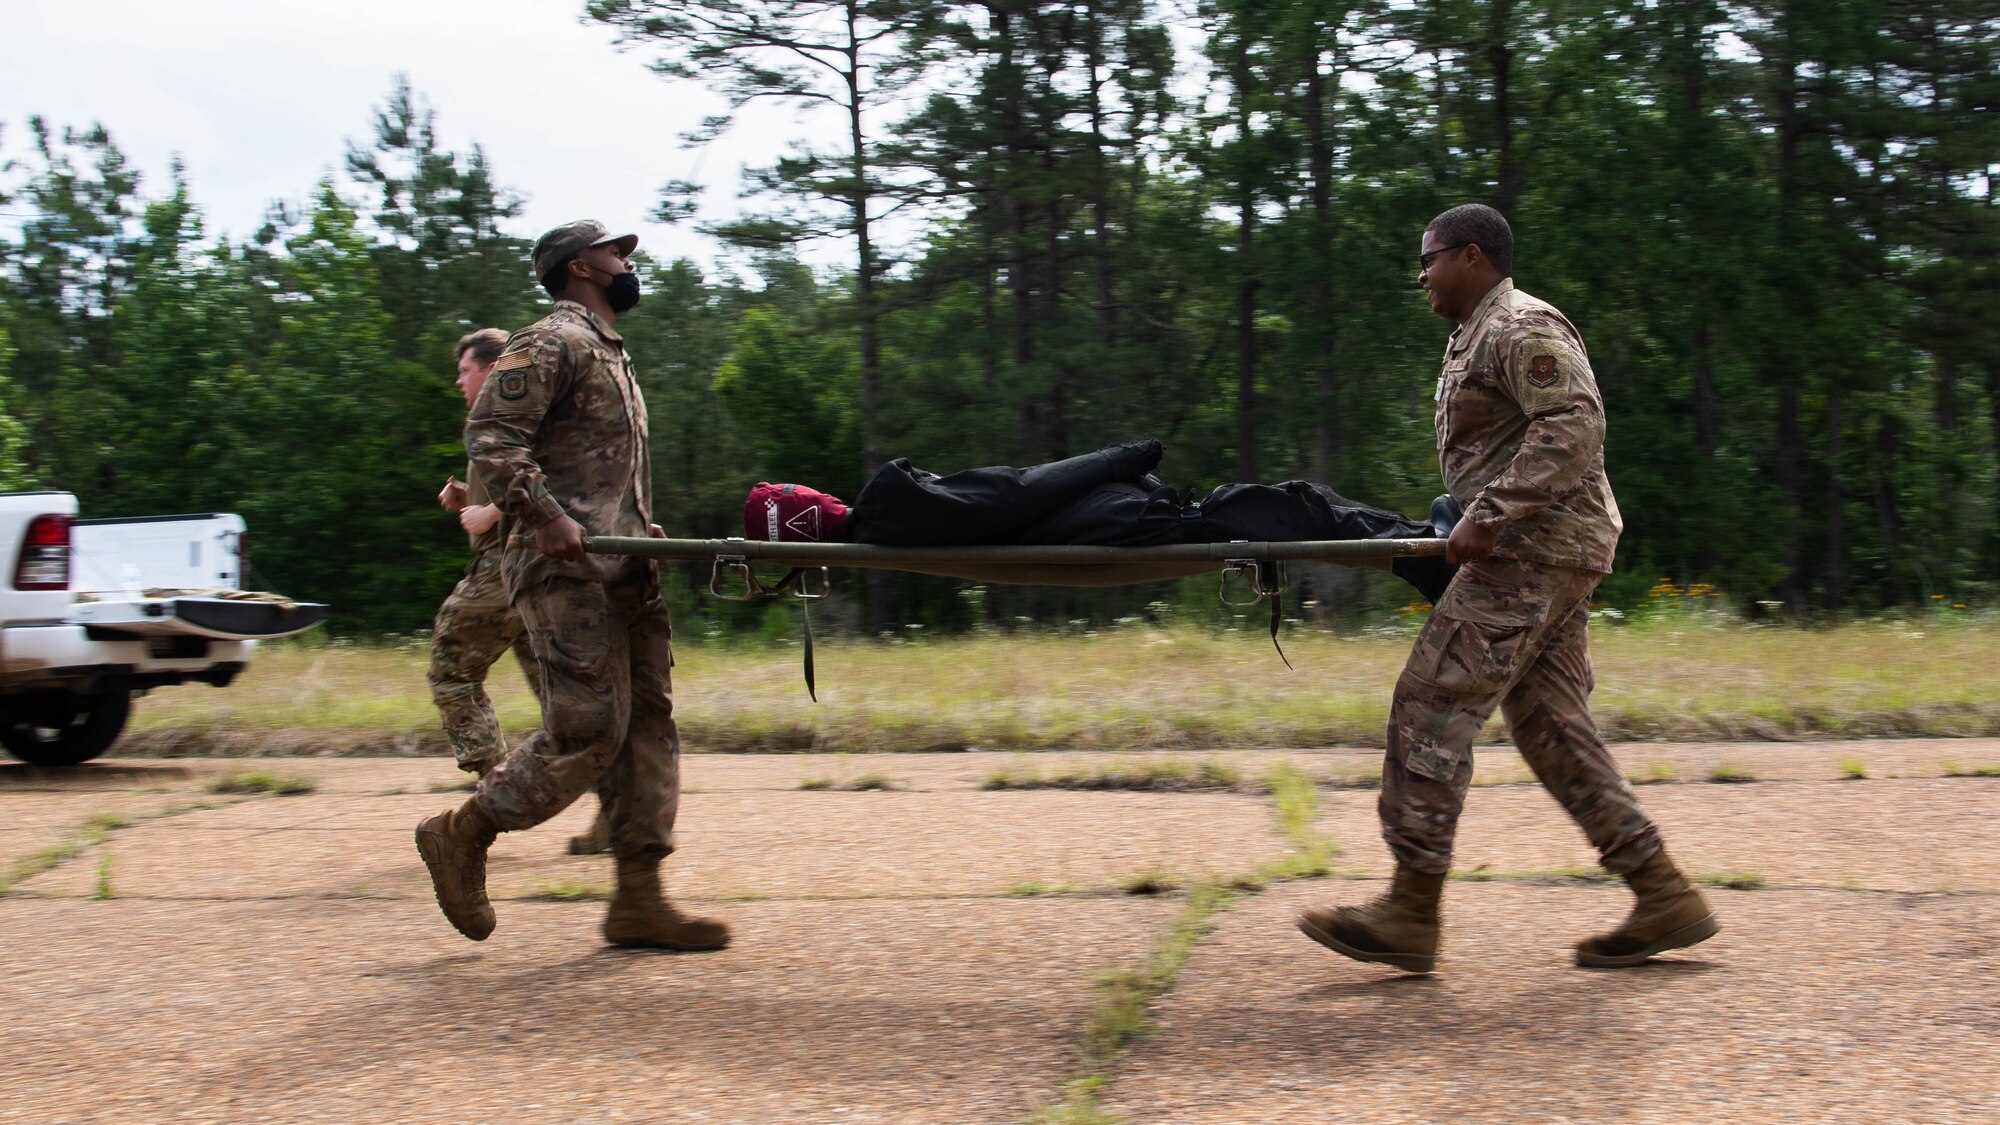 Airmen from the 2nd Civil Engineer Squadron transport a simulated casualty during a 2nd CES training exercise at Barksdale Air Force Base, Louisiana, May 20, 2021. The exercise combined various contingency skills the engineers may face in a deployed environment. (U.S. Air Force photo by Senior Airman Jacob B. Wrightsman)